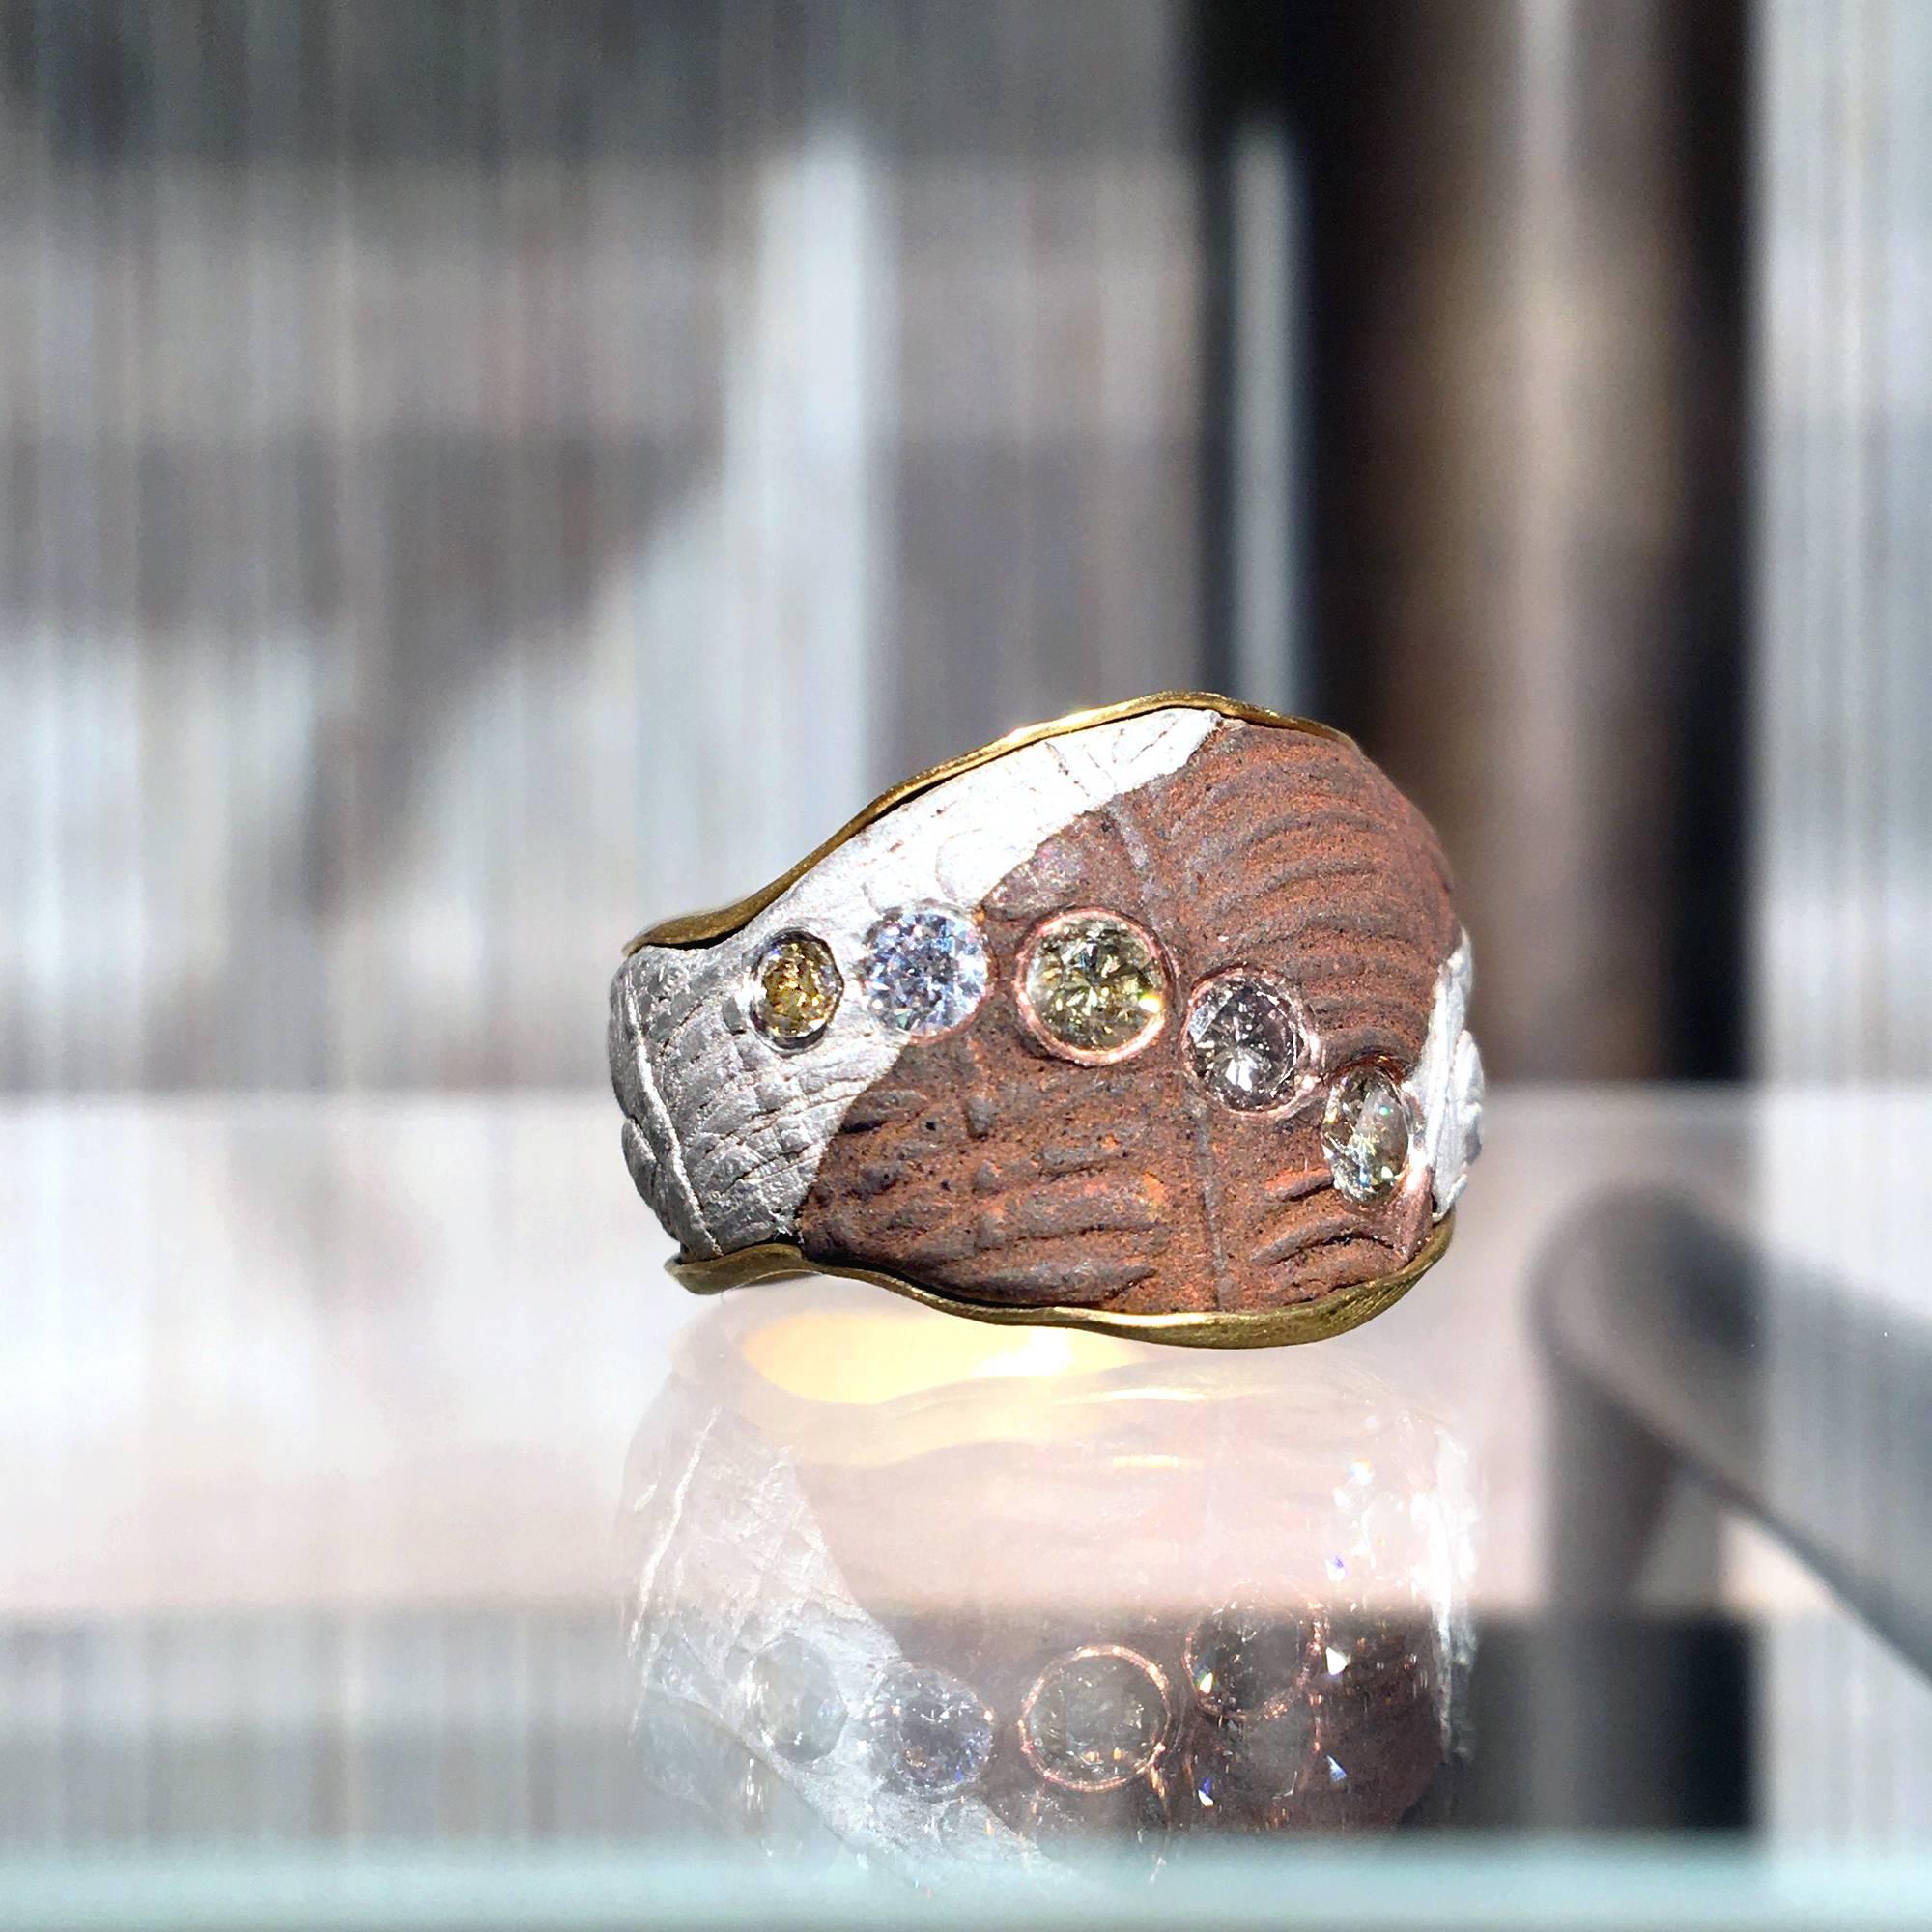 One of a Kind Ring handcrafted in Germany with five bezel-set round brilliant-cut white diamonds on a specialized pure gold, fine silver, and copper Mokumegane band with a magnificent 22k gold interior. Size 7.25.

Stamped and Hallmarked